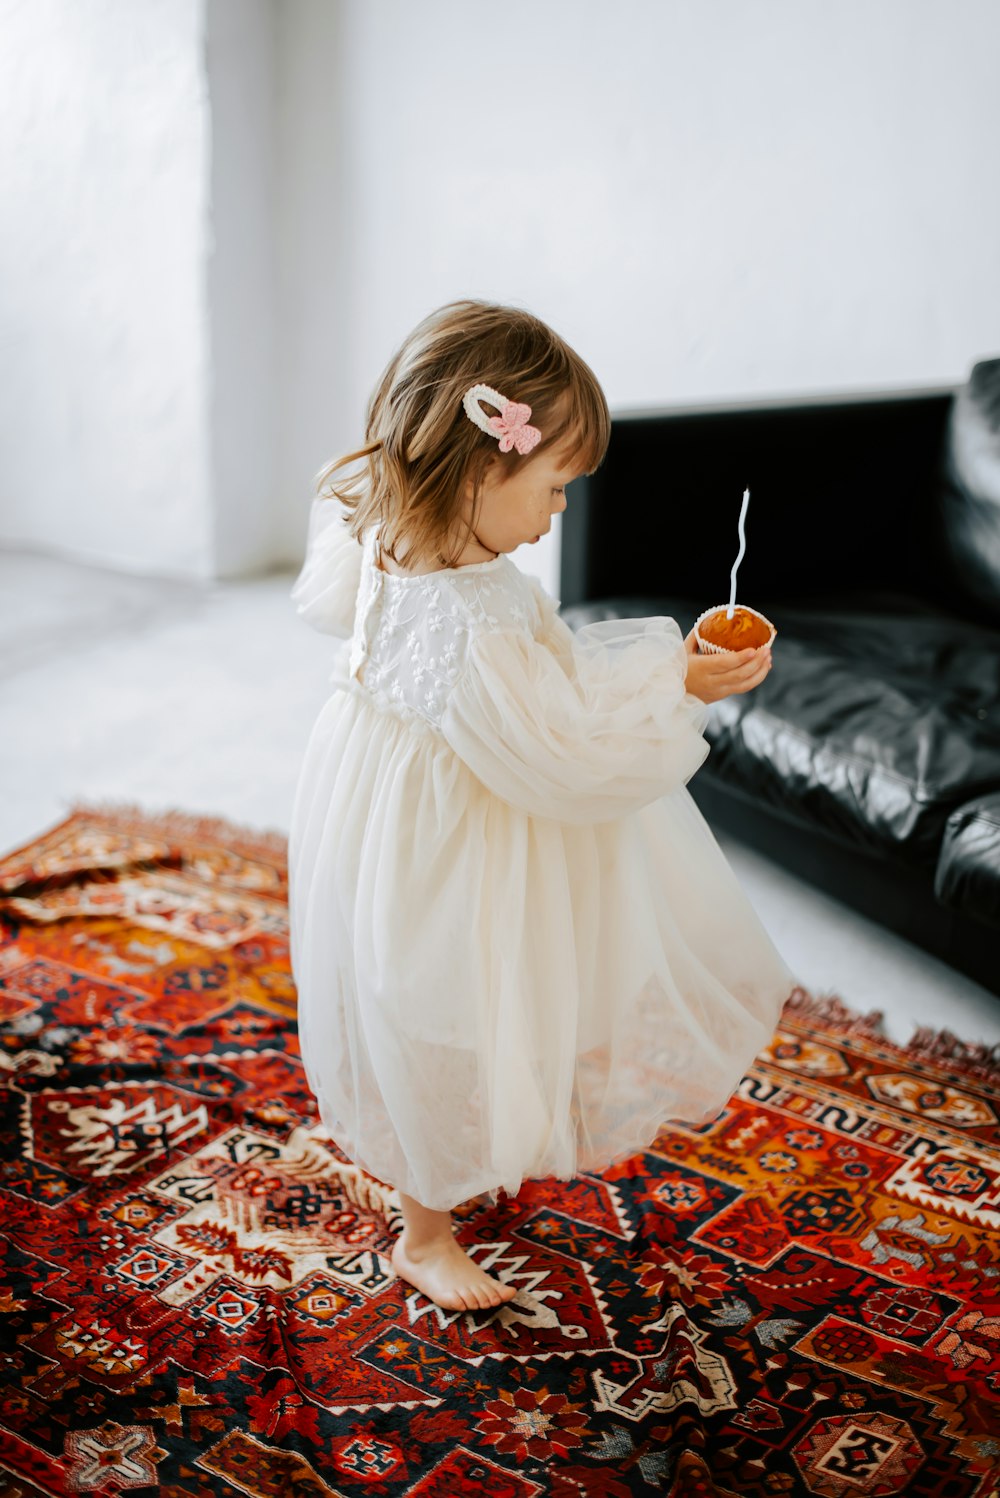 a little girl standing on a rug holding a bowl of food